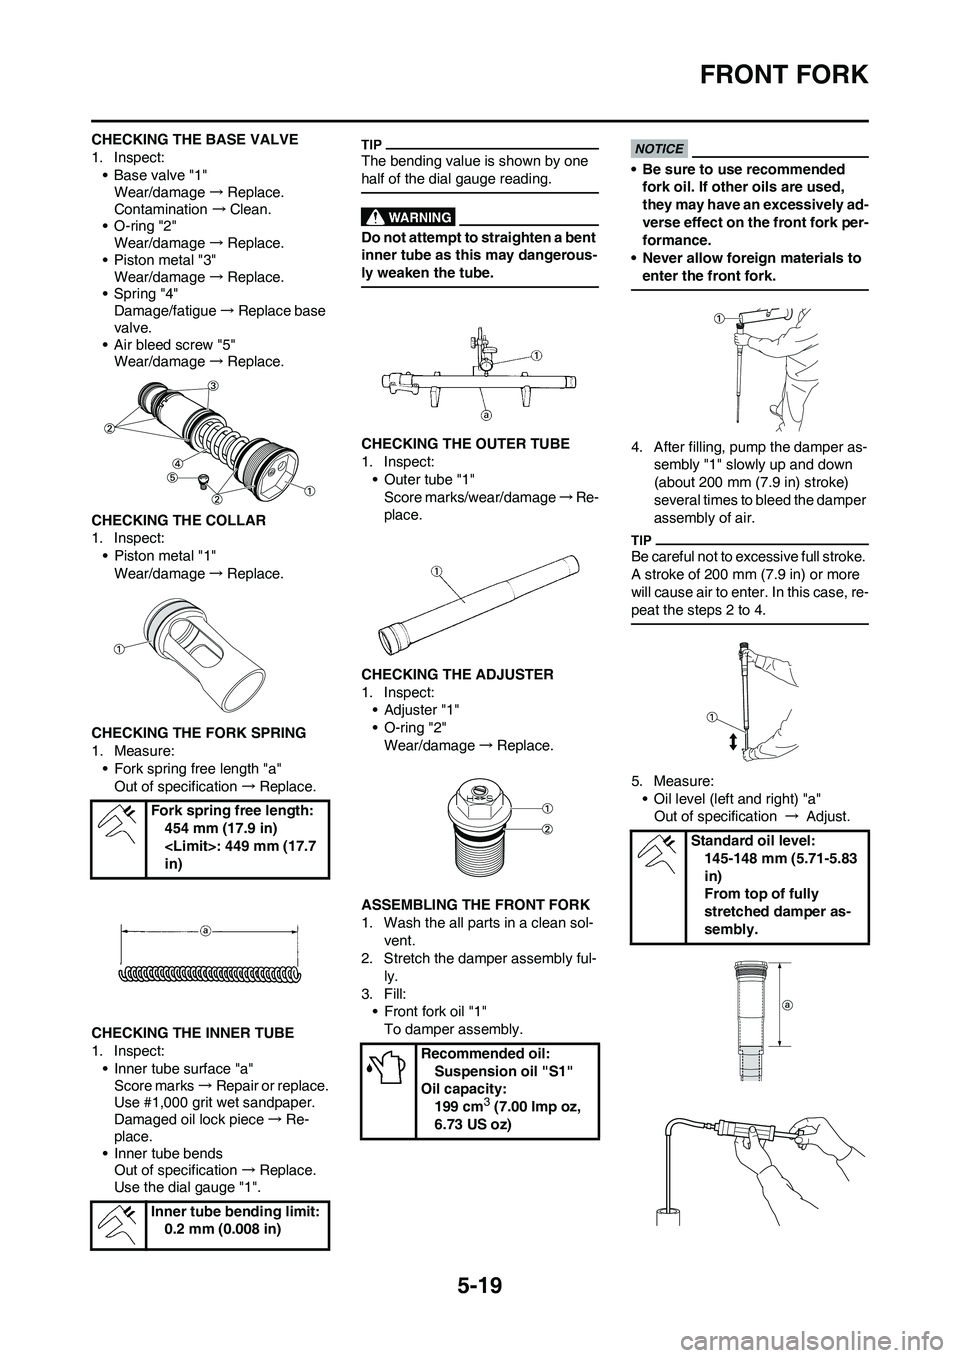 YAMAHA YZ450F 2009  Owners Manual 5-19
FRONT FORK
CHECKING THE BASE VALVE
1. Inspect:
• Base valve "1"
Wear/damage →Replace.
Contamination →Clean.
• O-ring "2"
Wear/damage →Replace.
• Piston metal "3"
Wear/damage →Replac